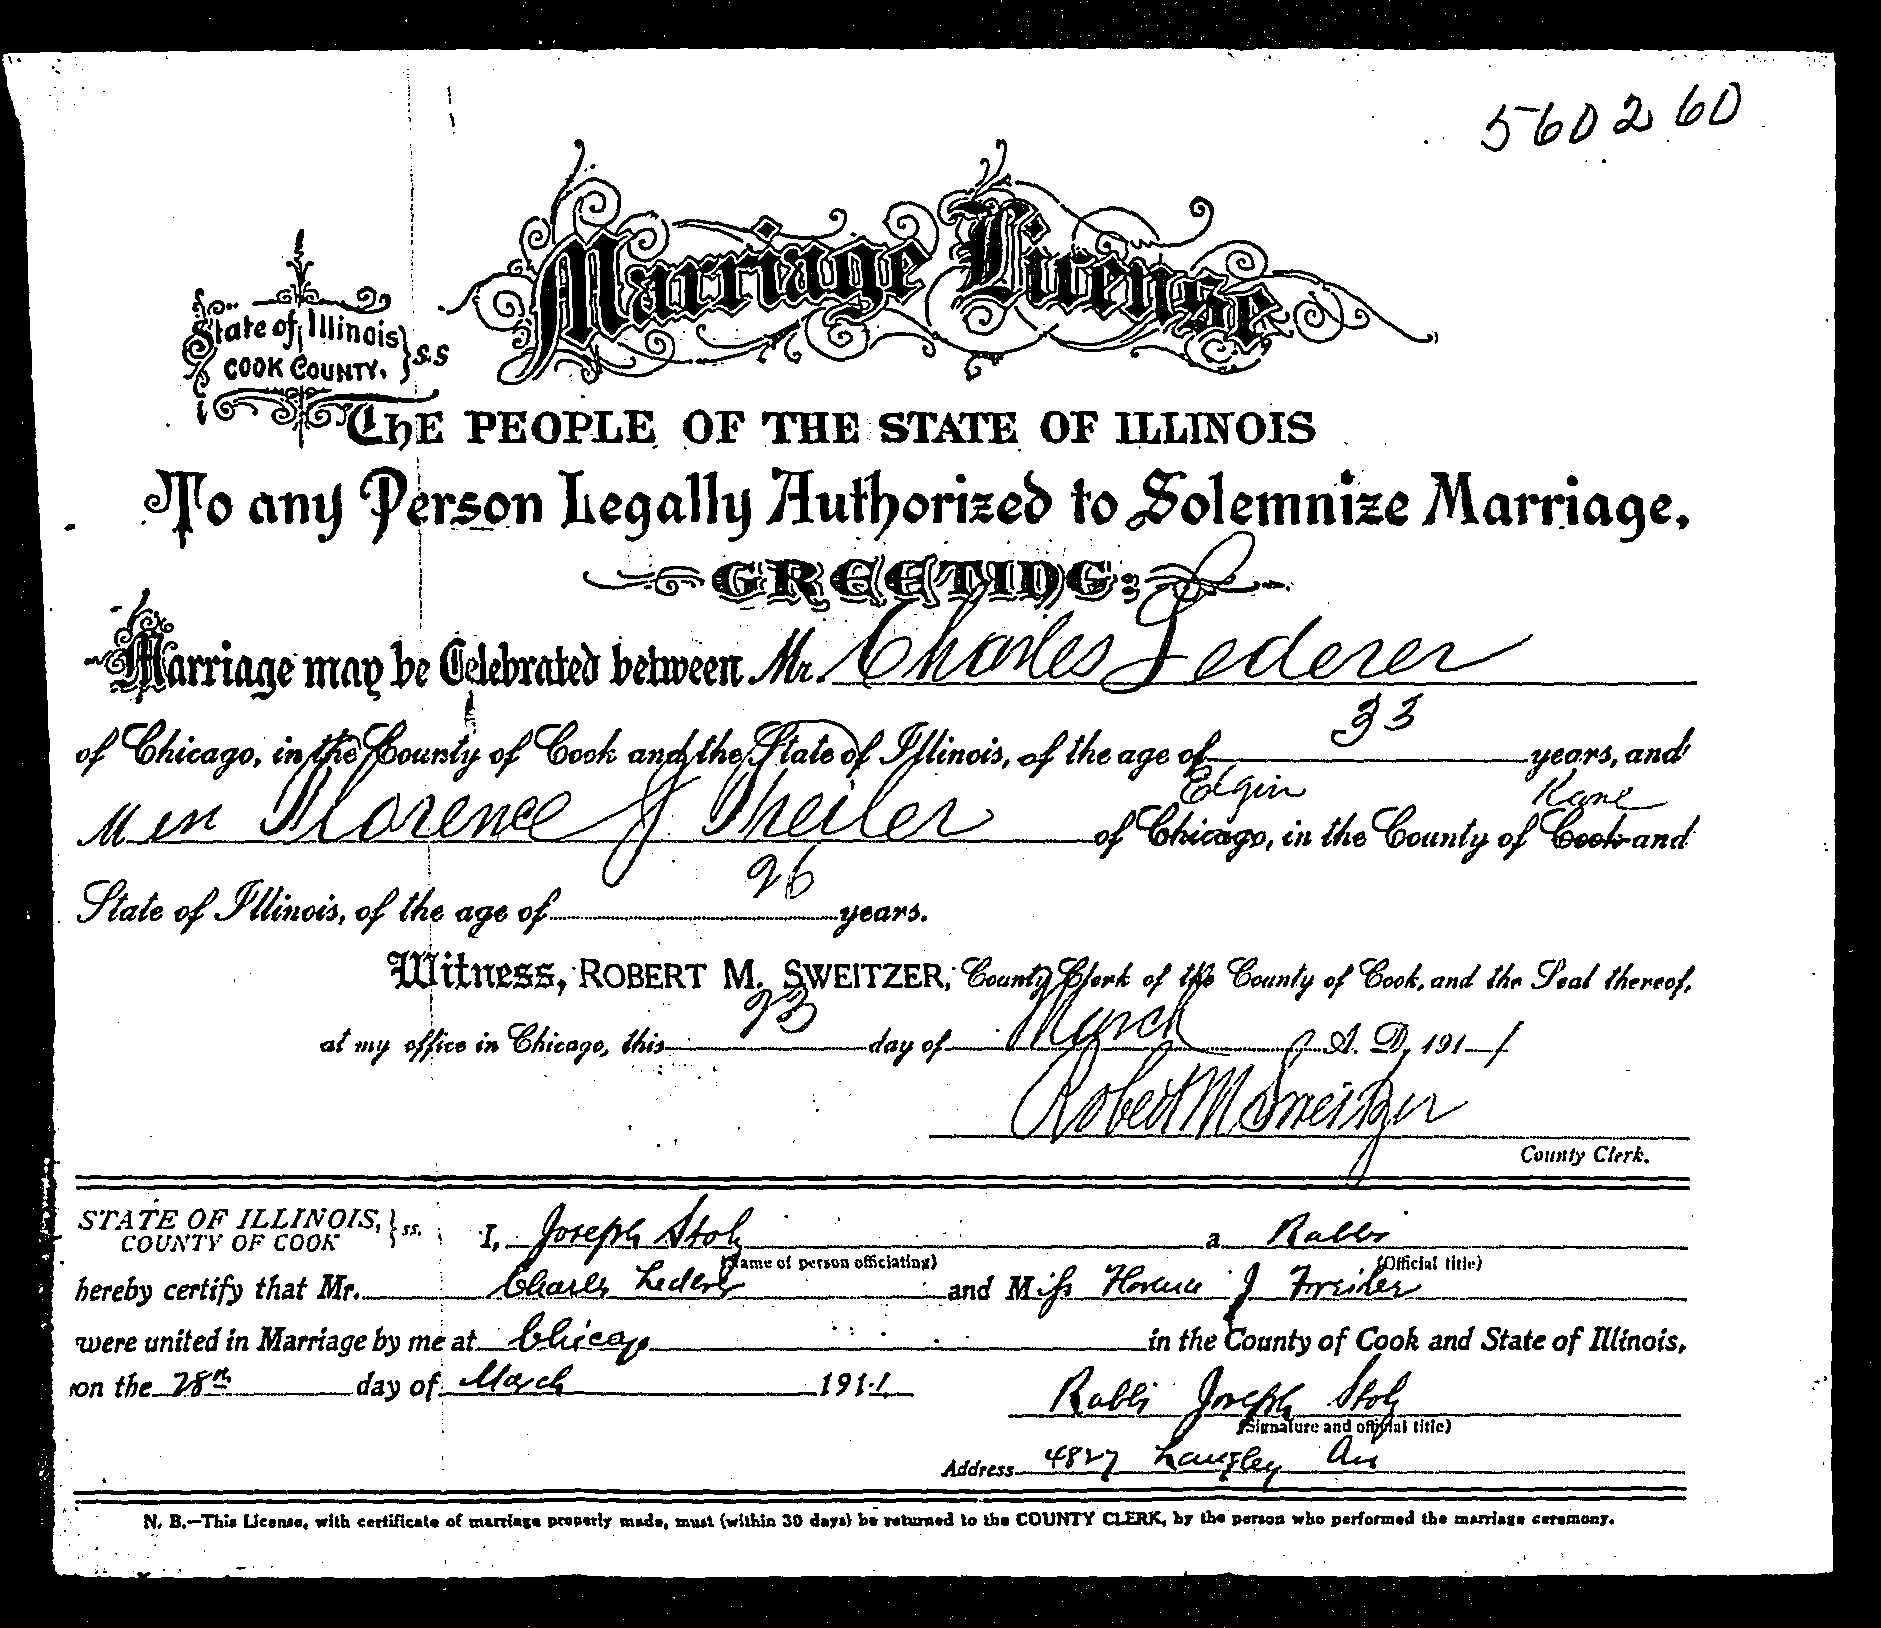 Florence Freiler and Charles Lederer marriage certificate, 28 March 1911